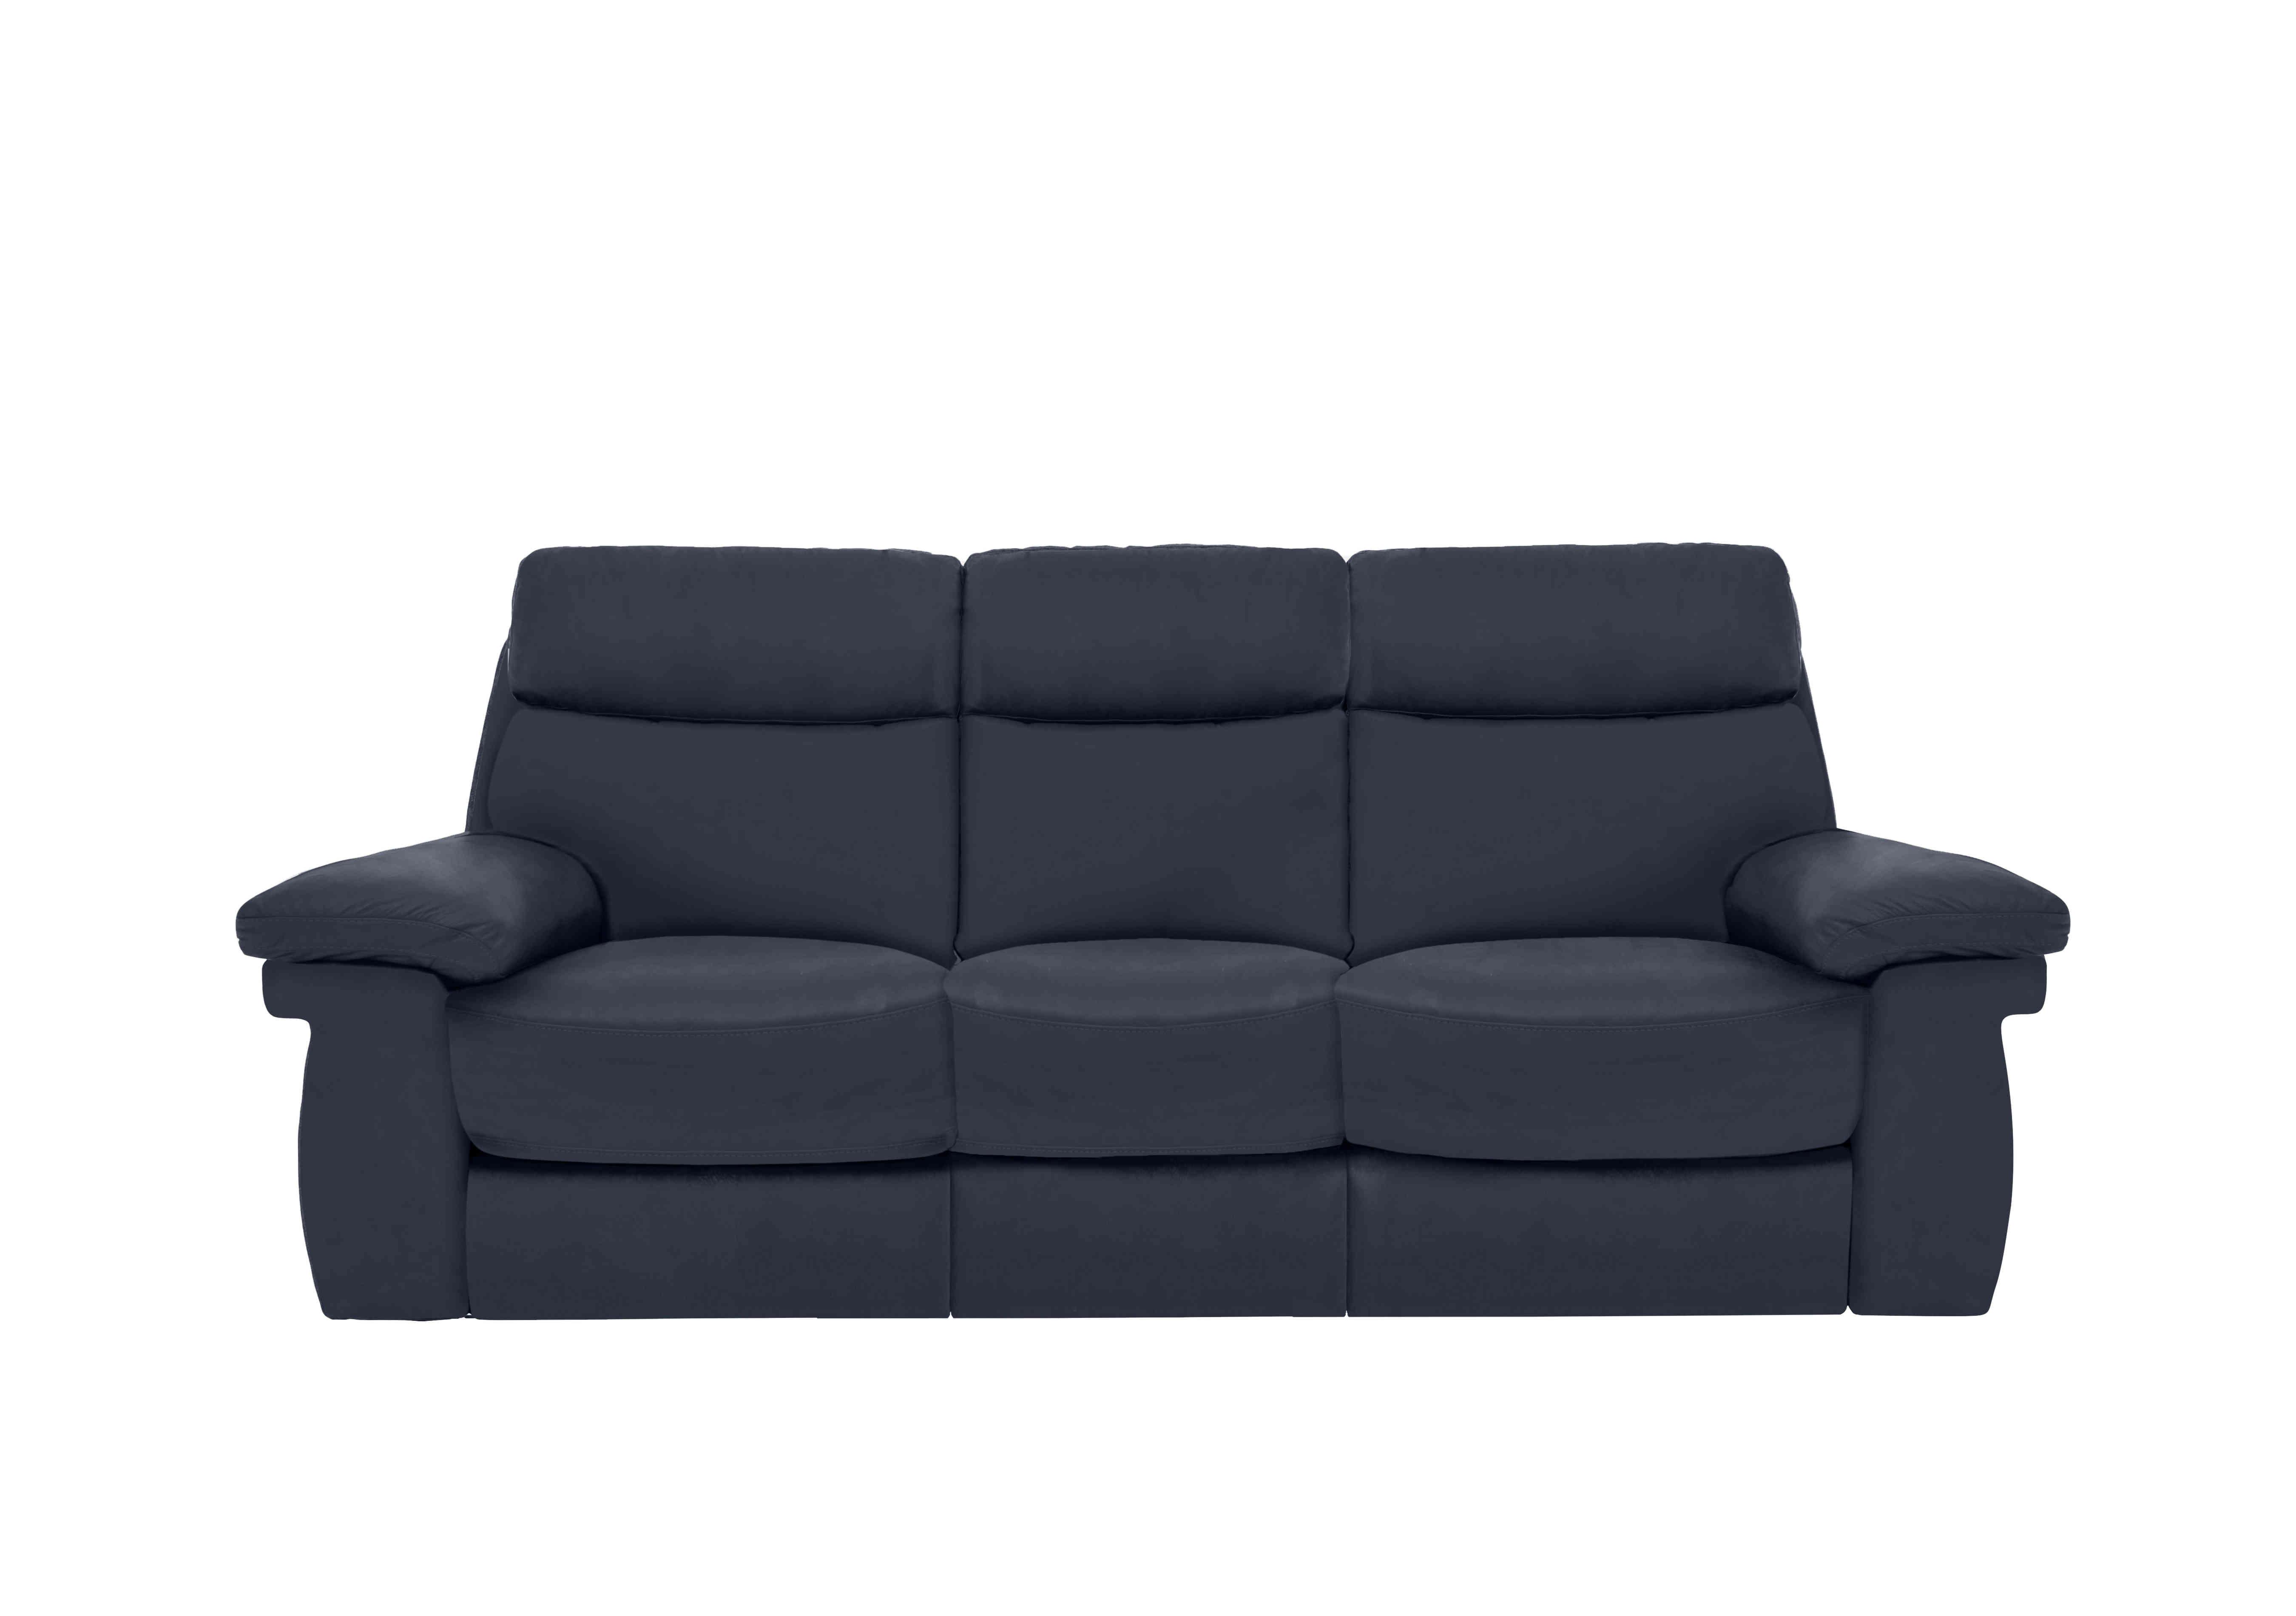 Serene 3 Seater Leather Power Recliner Sofa with Power Headrests in Bx-036c Navy on Furniture Village